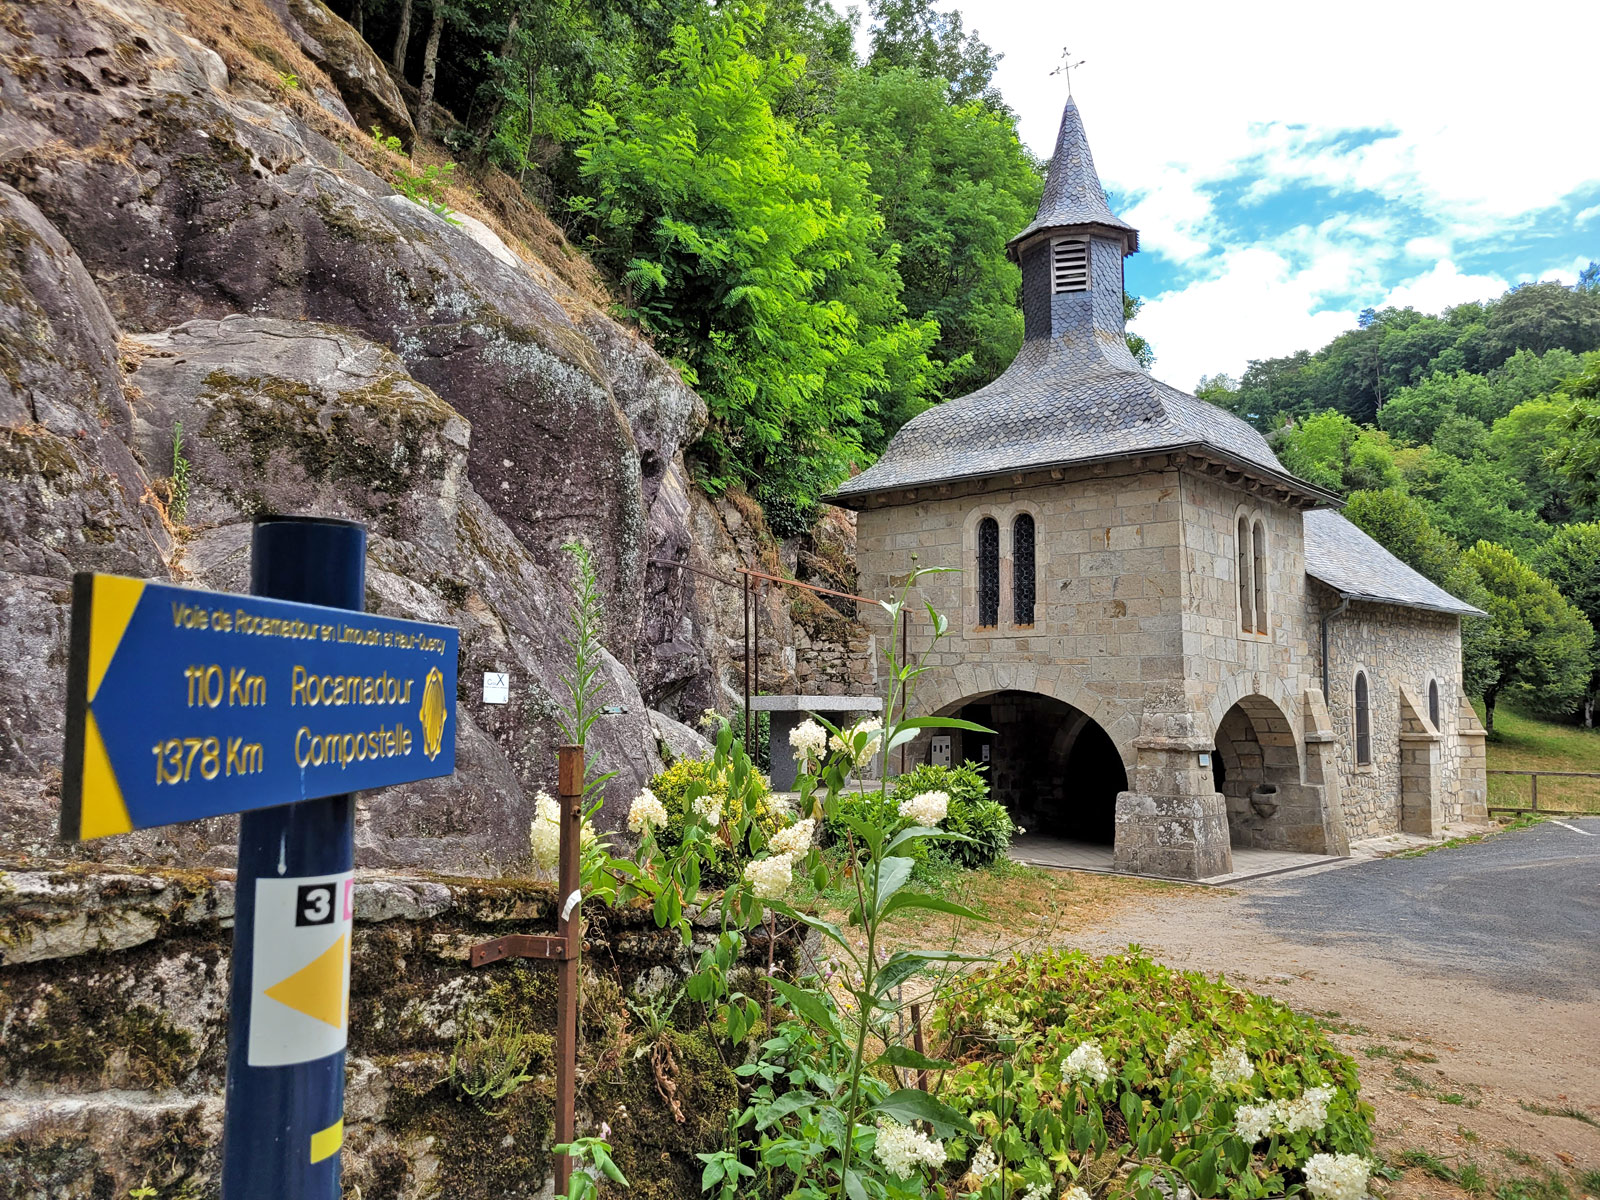 Visit to the Village of Corrèze